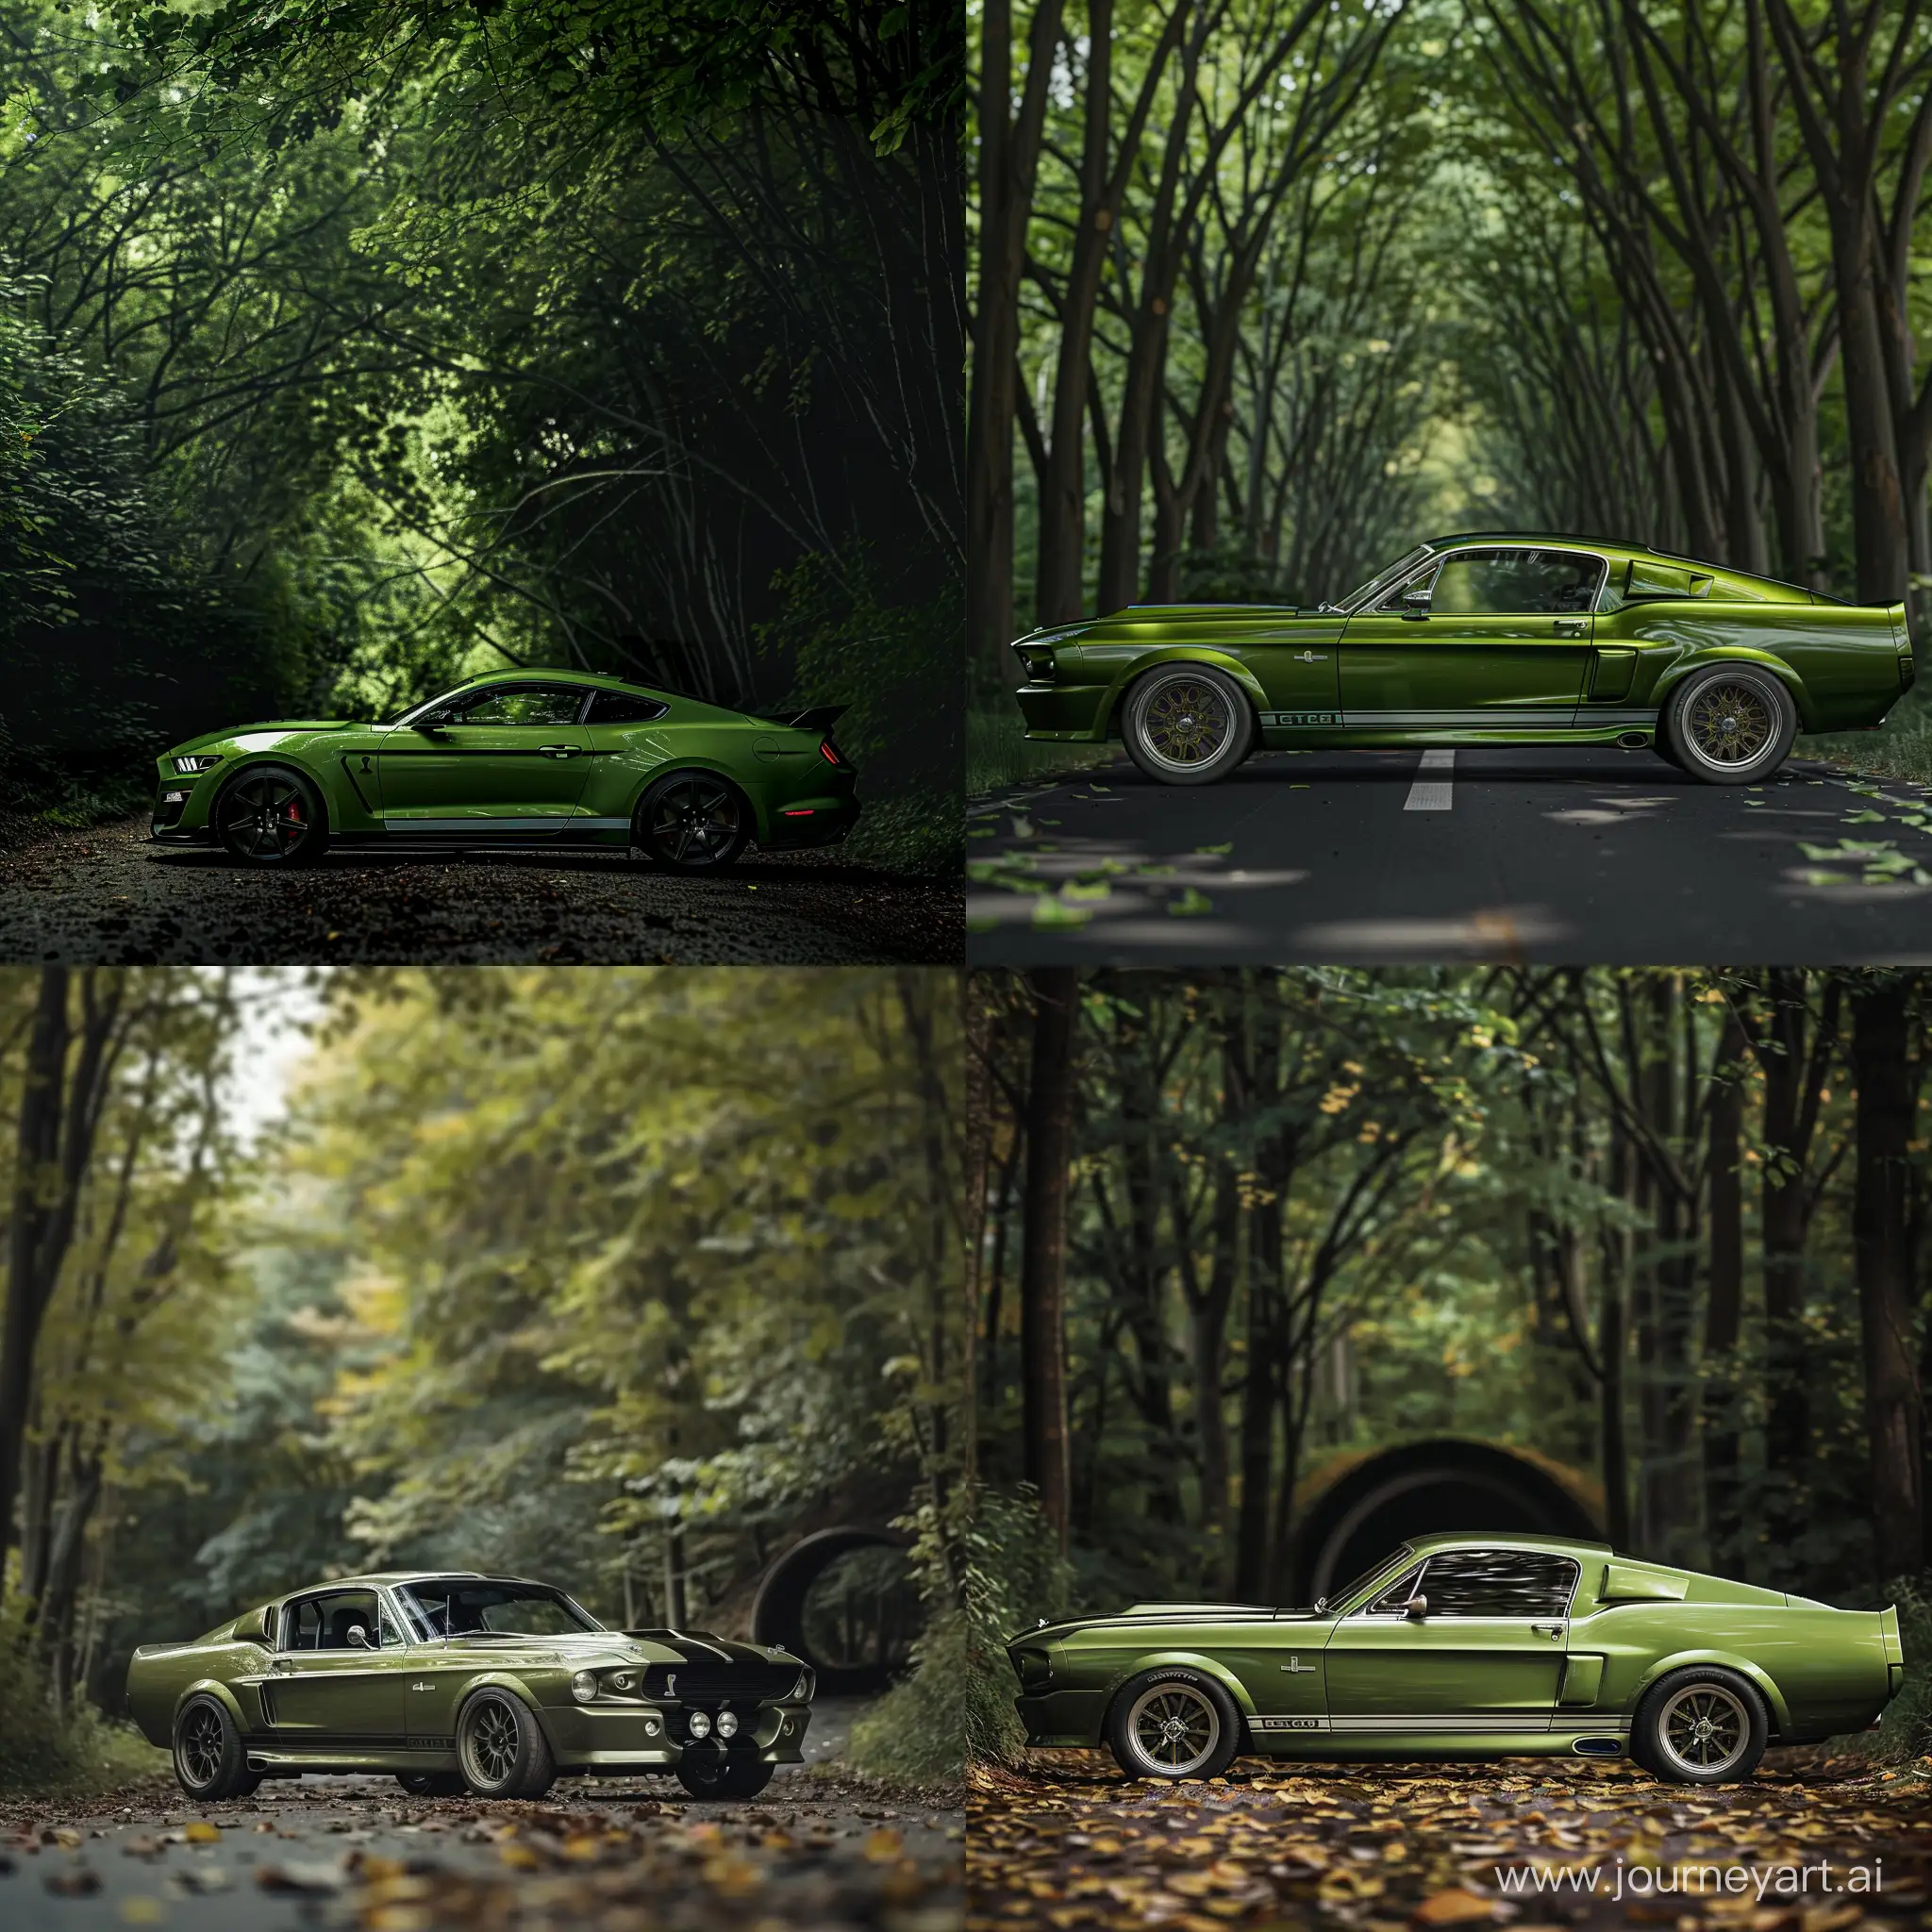 side front VIEW OF green mustang shelby , HIGH SPEED CAMERA PHOTOGRAPH, HORROR FILM LUT, TUNNEL OF TREES, SURREAL, green mustang shelby, HIGH RESOLUTION